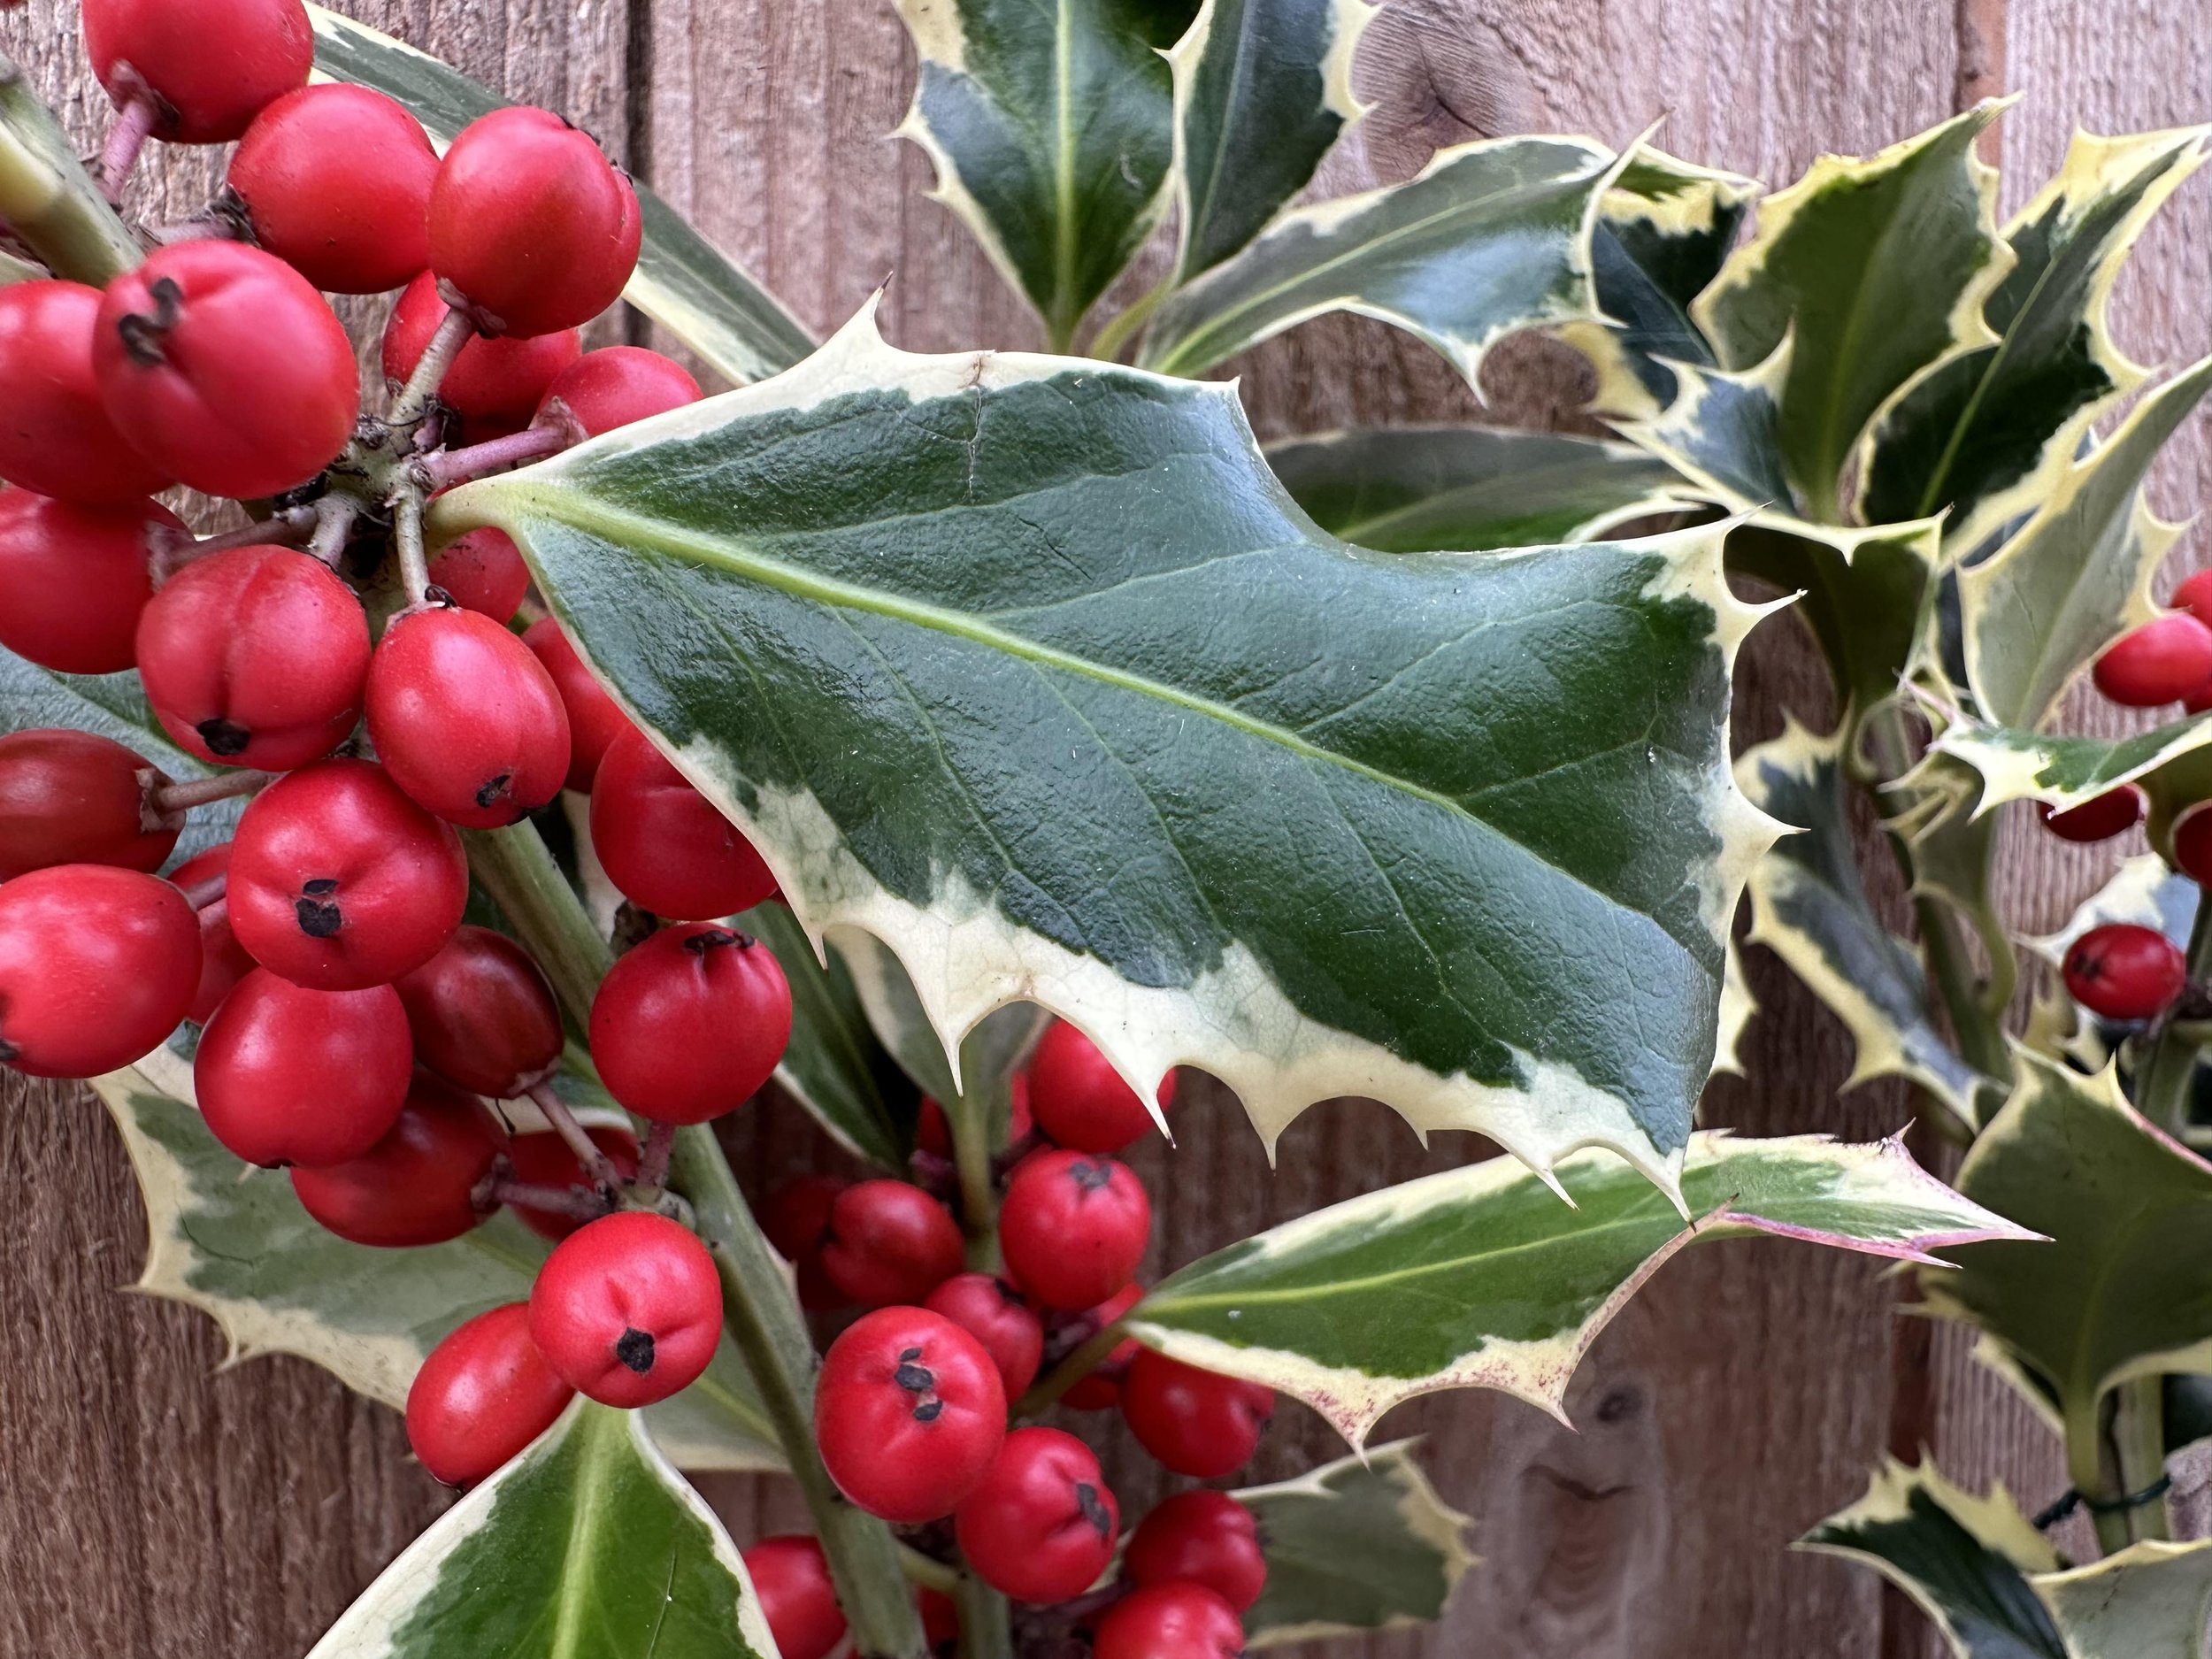 variegated holly bunches up close.jpg